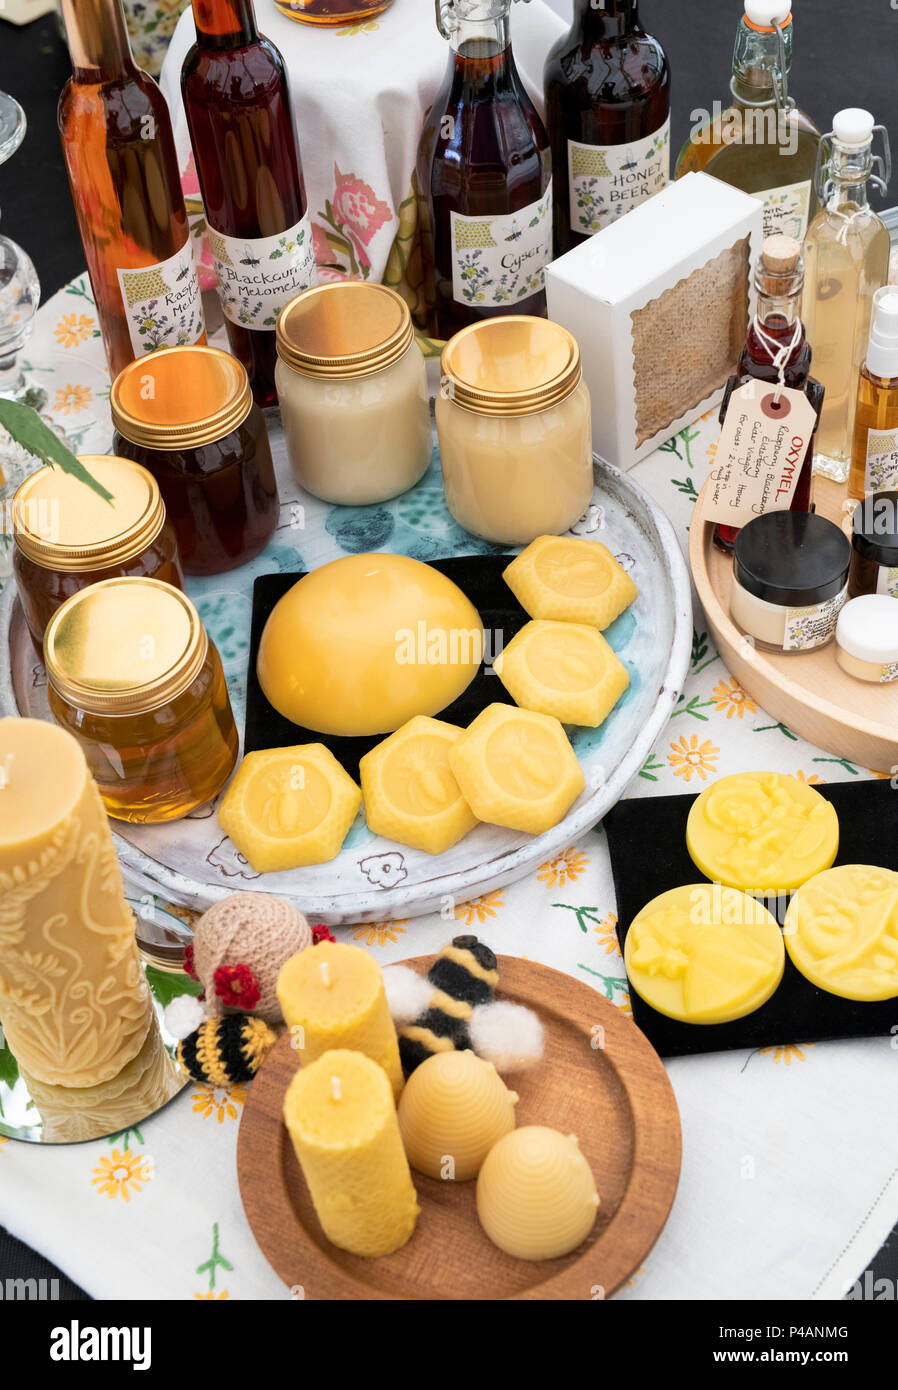 Bees wax products and jars of honey on display at an agricultural show. UK Stock Photo